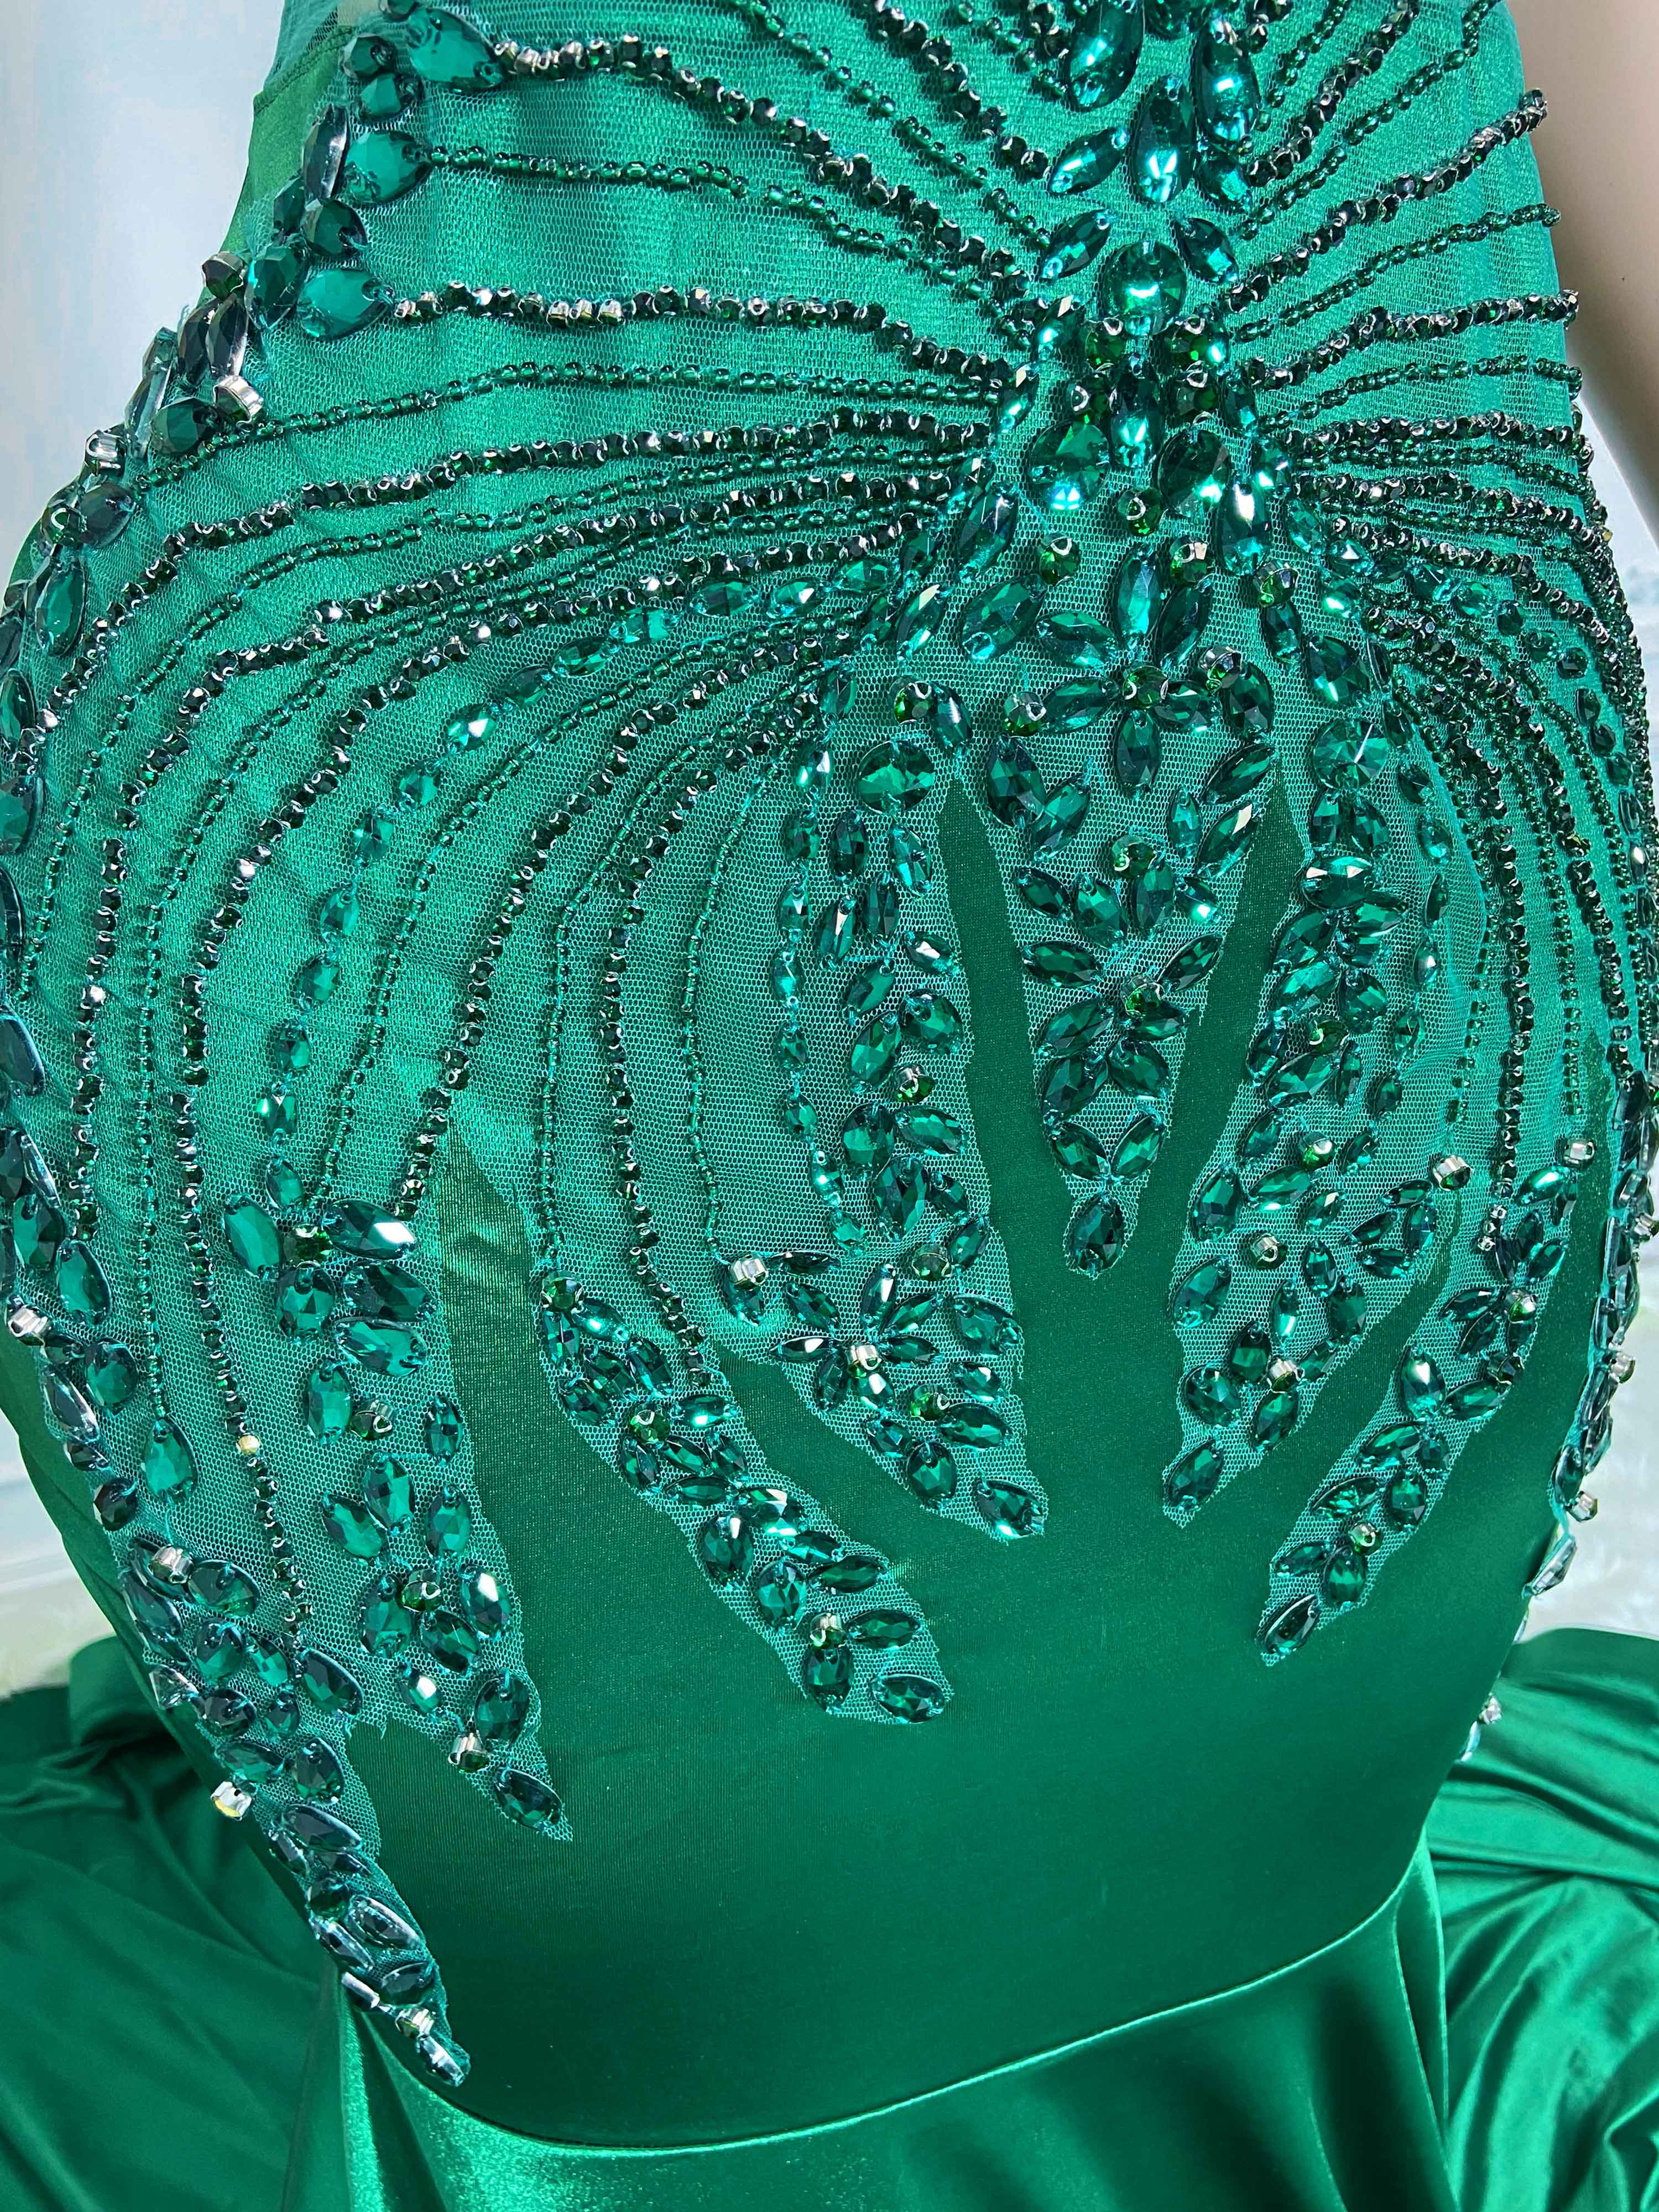 Green Low Cut and Rhinestone Sleeveless Maxi Gown